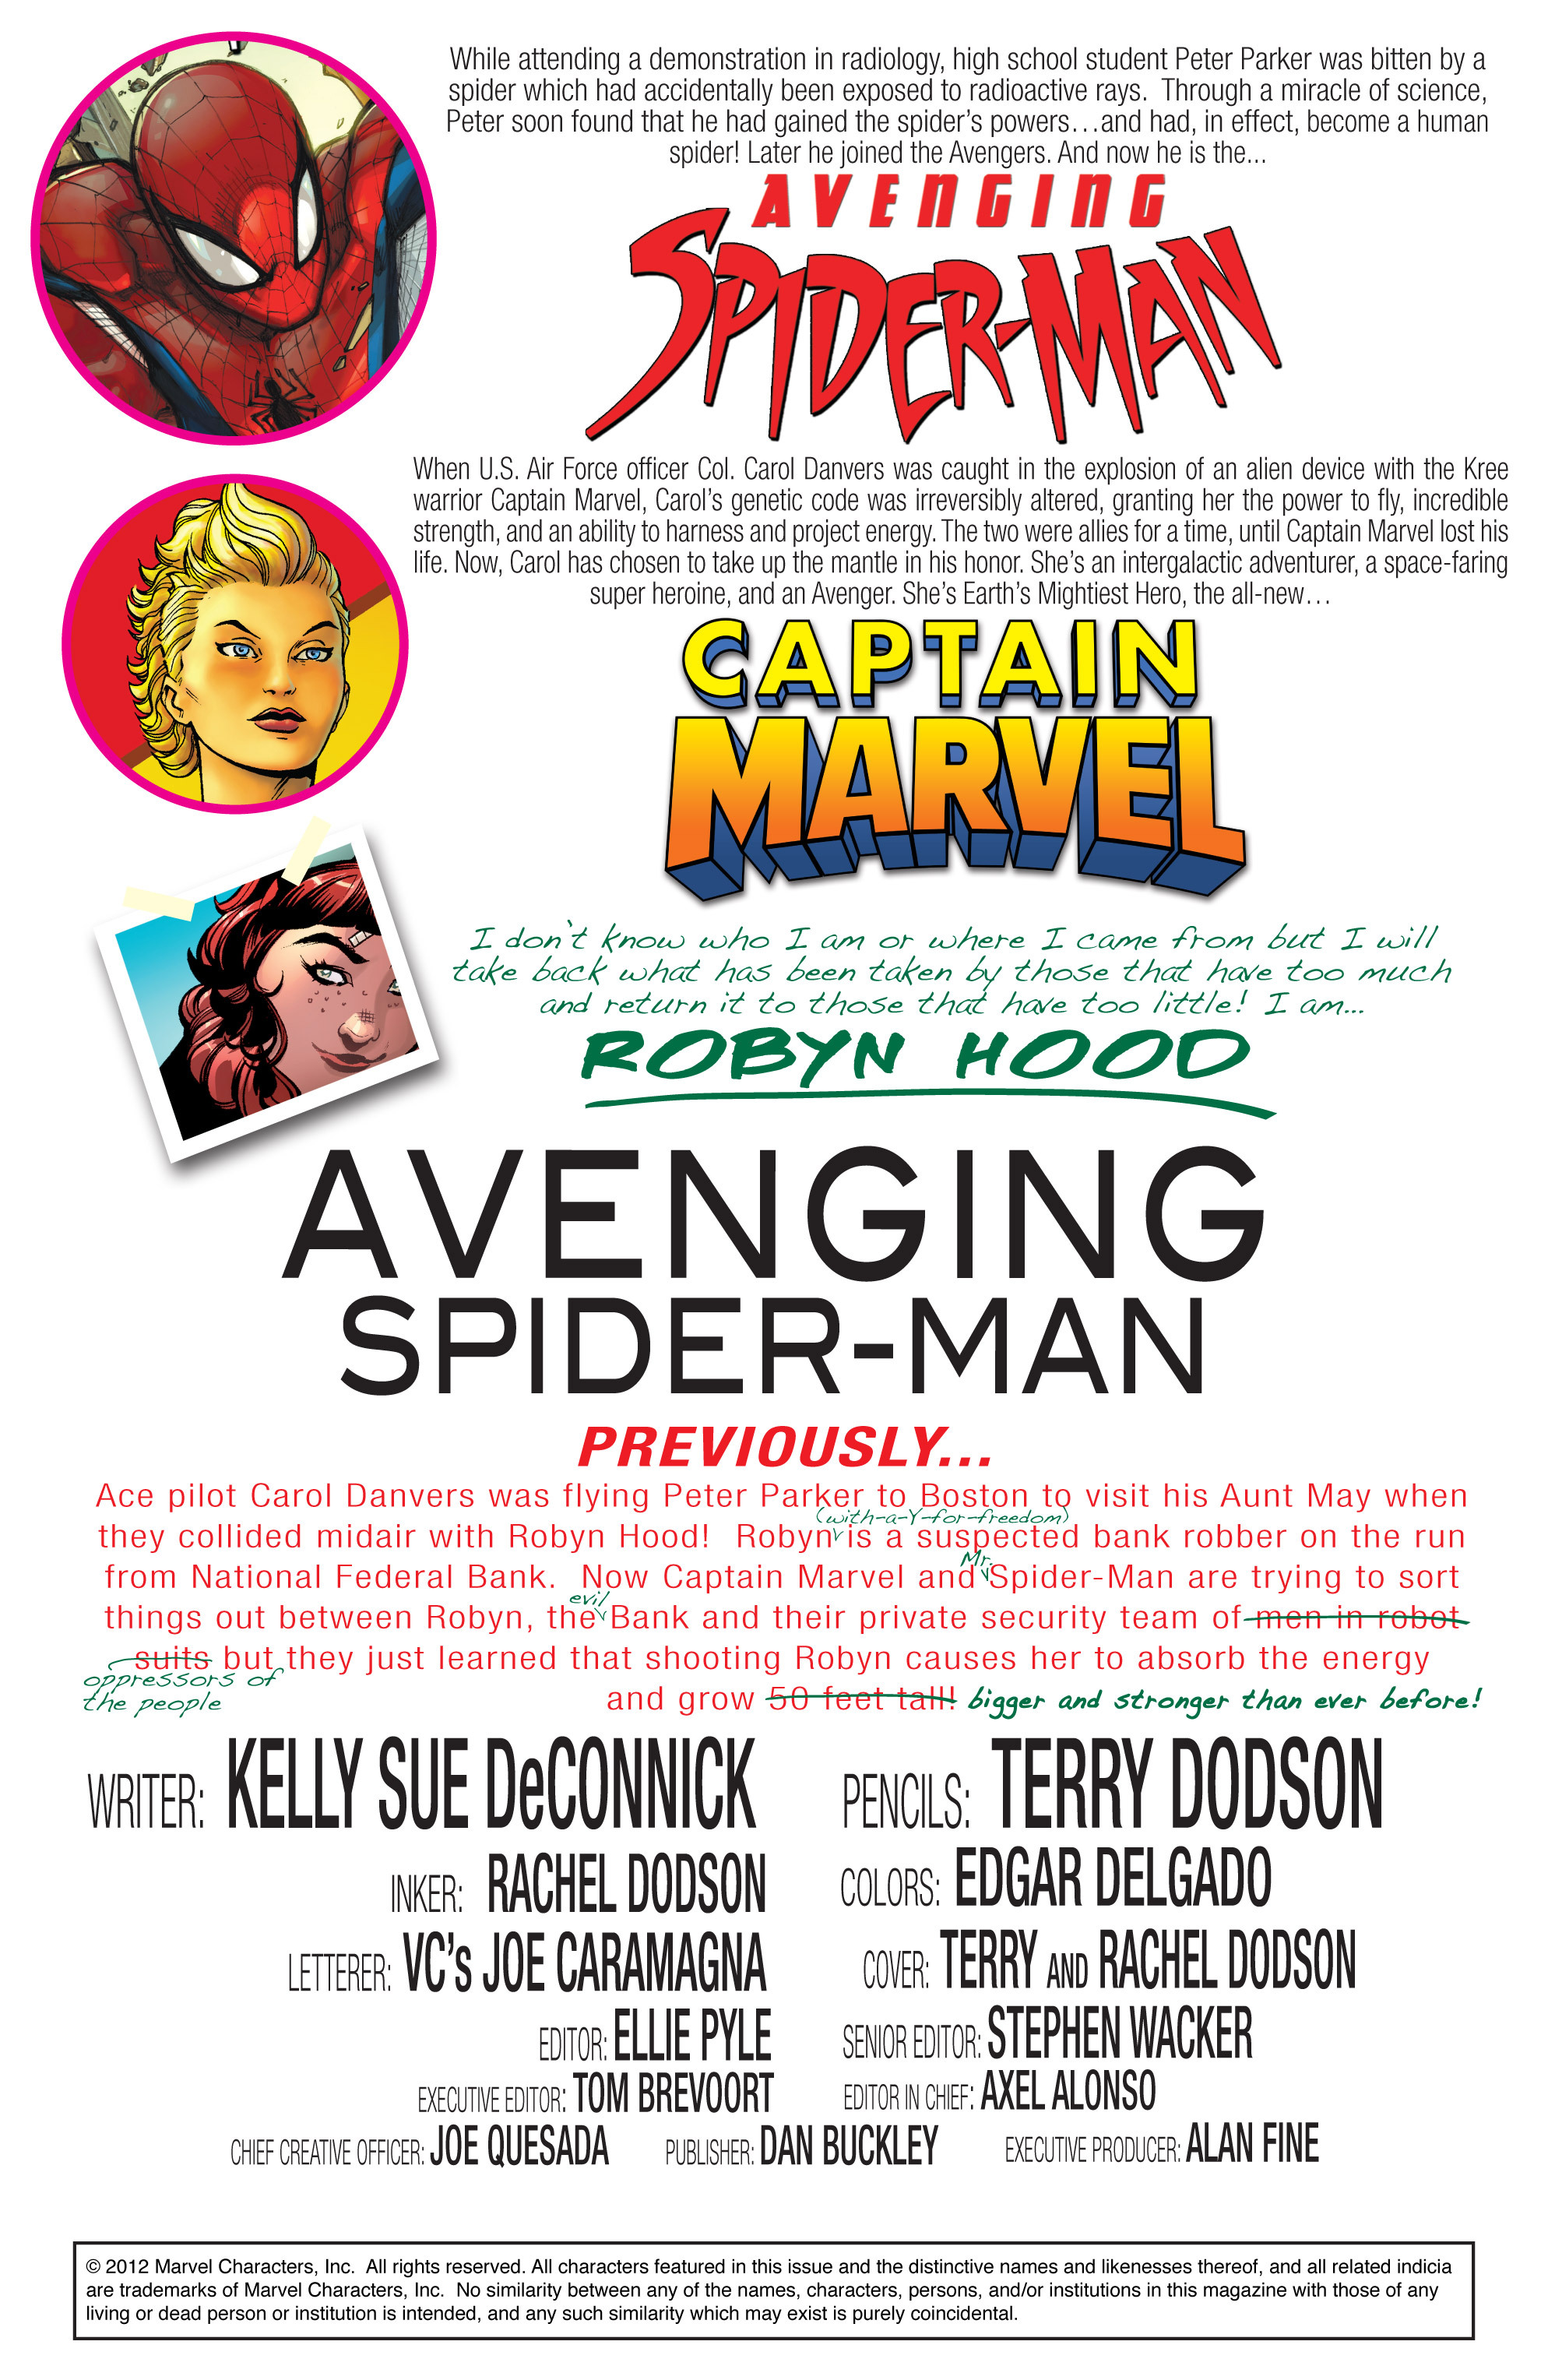 Read online Avenging Spider-Man comic -  Issue #10 - 2